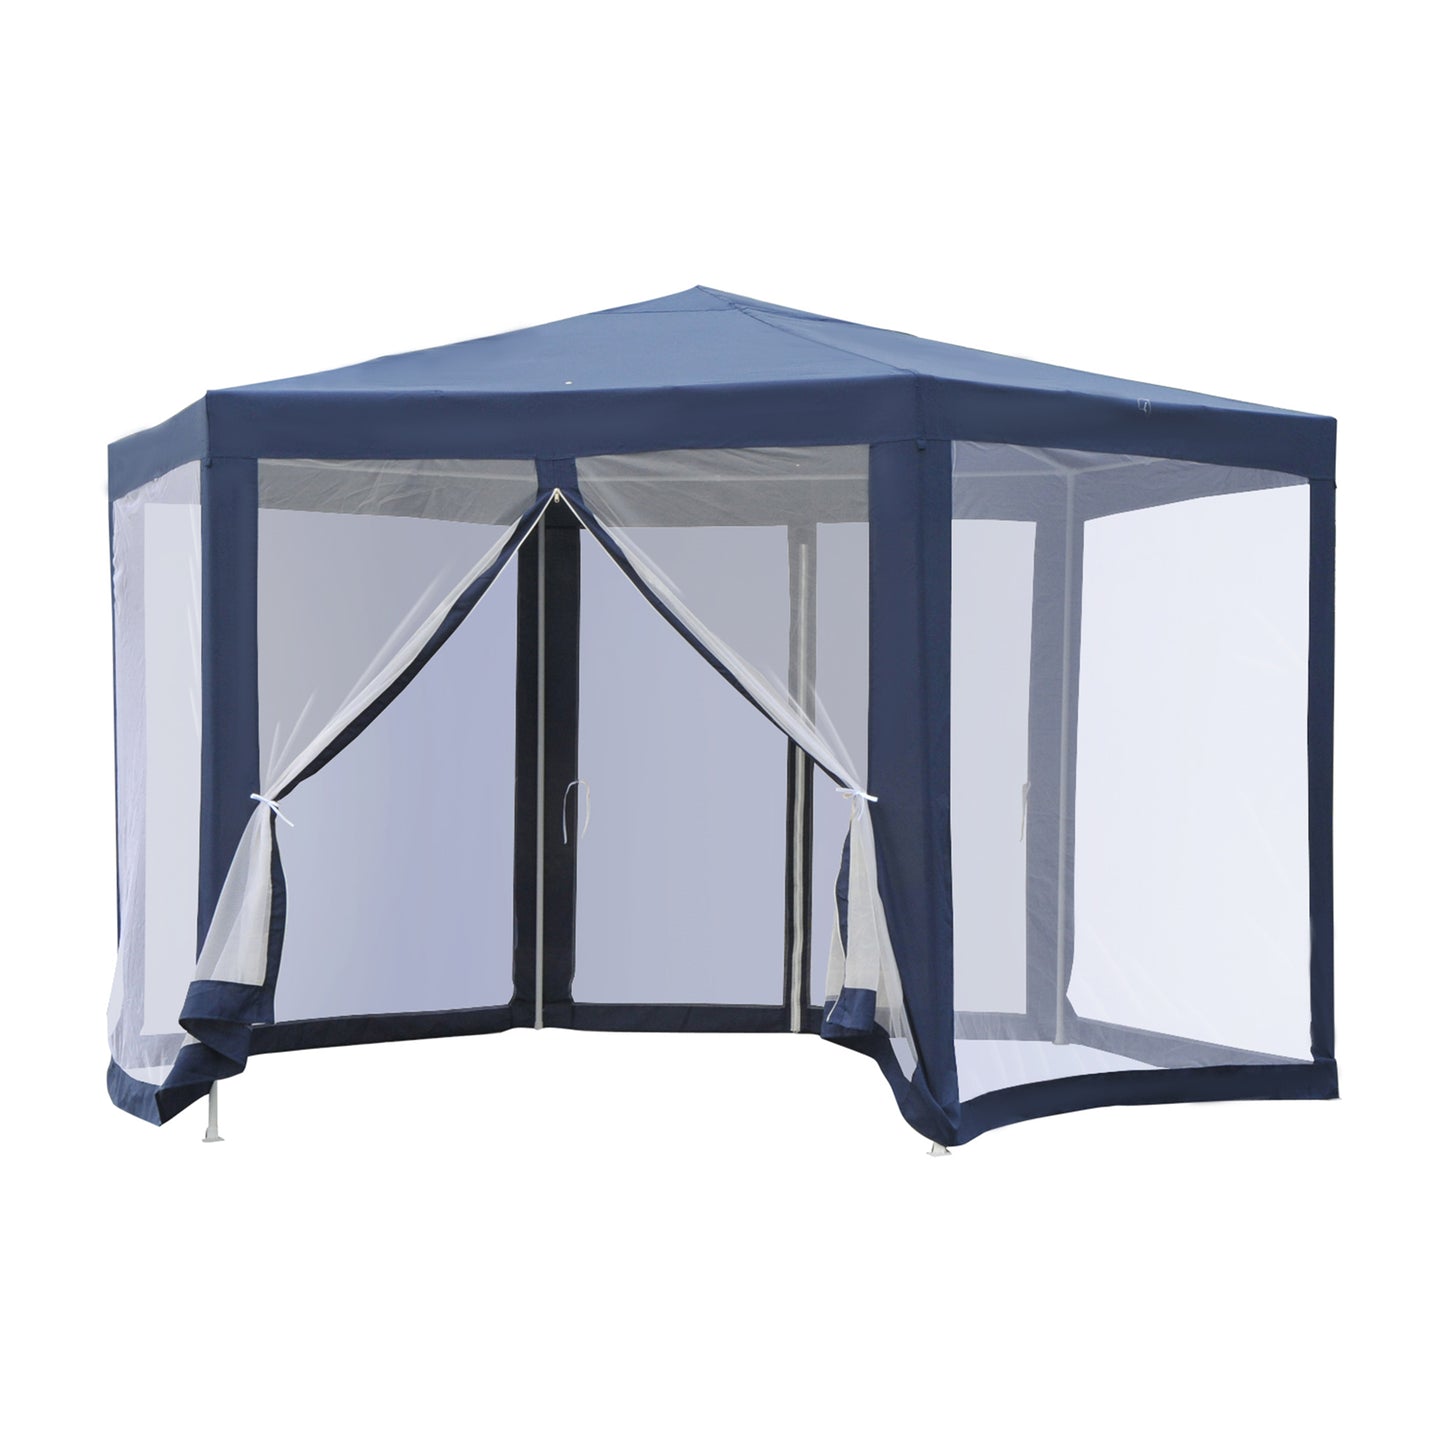 Outsunny Hexagonal Patio Gazebo Outdoor Canopy Party Tent Activity Event w/ Mosquito Net